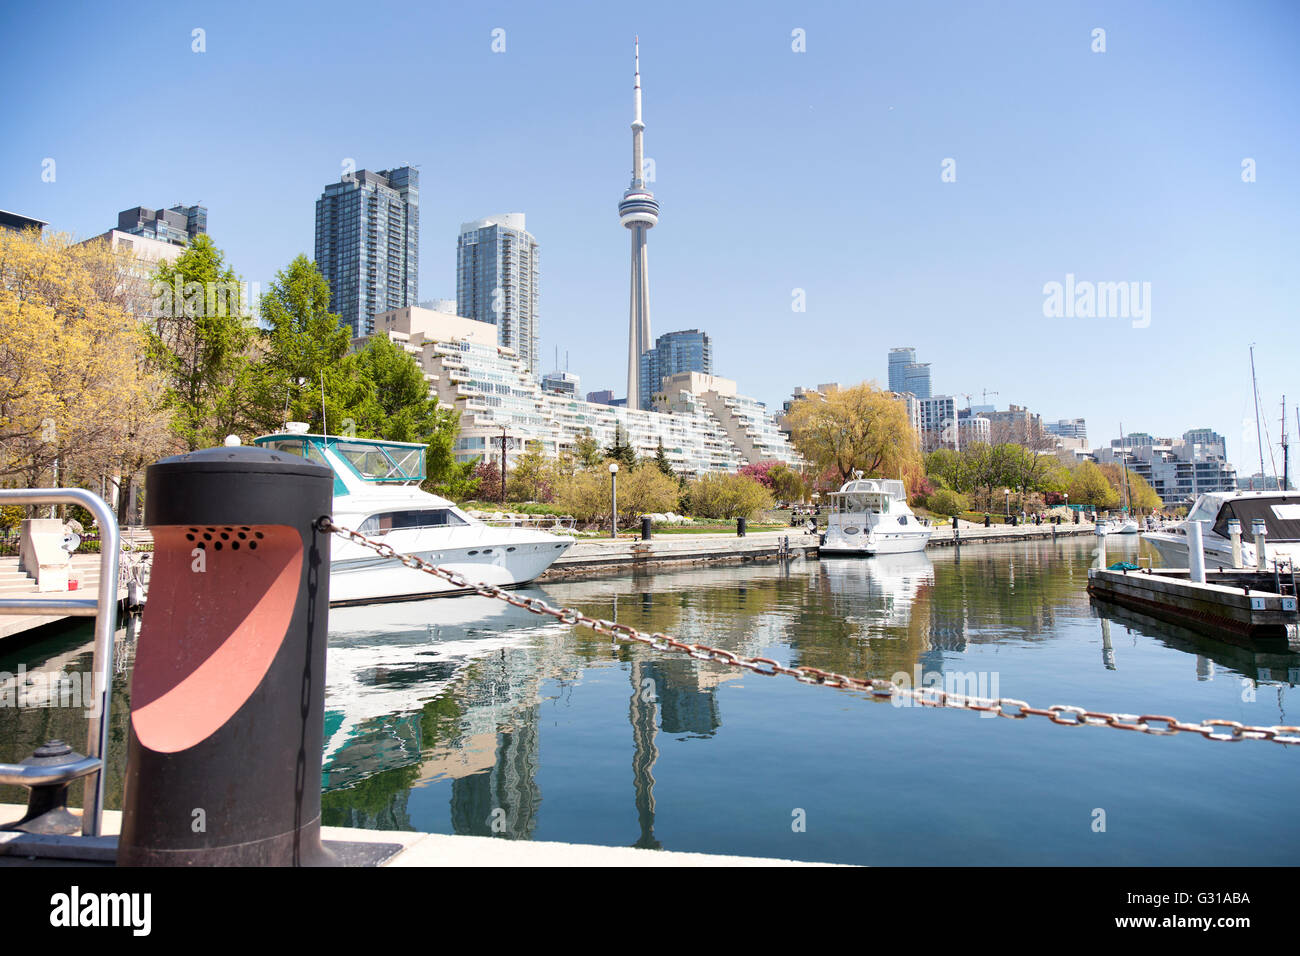 TORONTO - May17, 2016: View of Toronto from Queens Quay in the  Harborfront area. Stock Photo